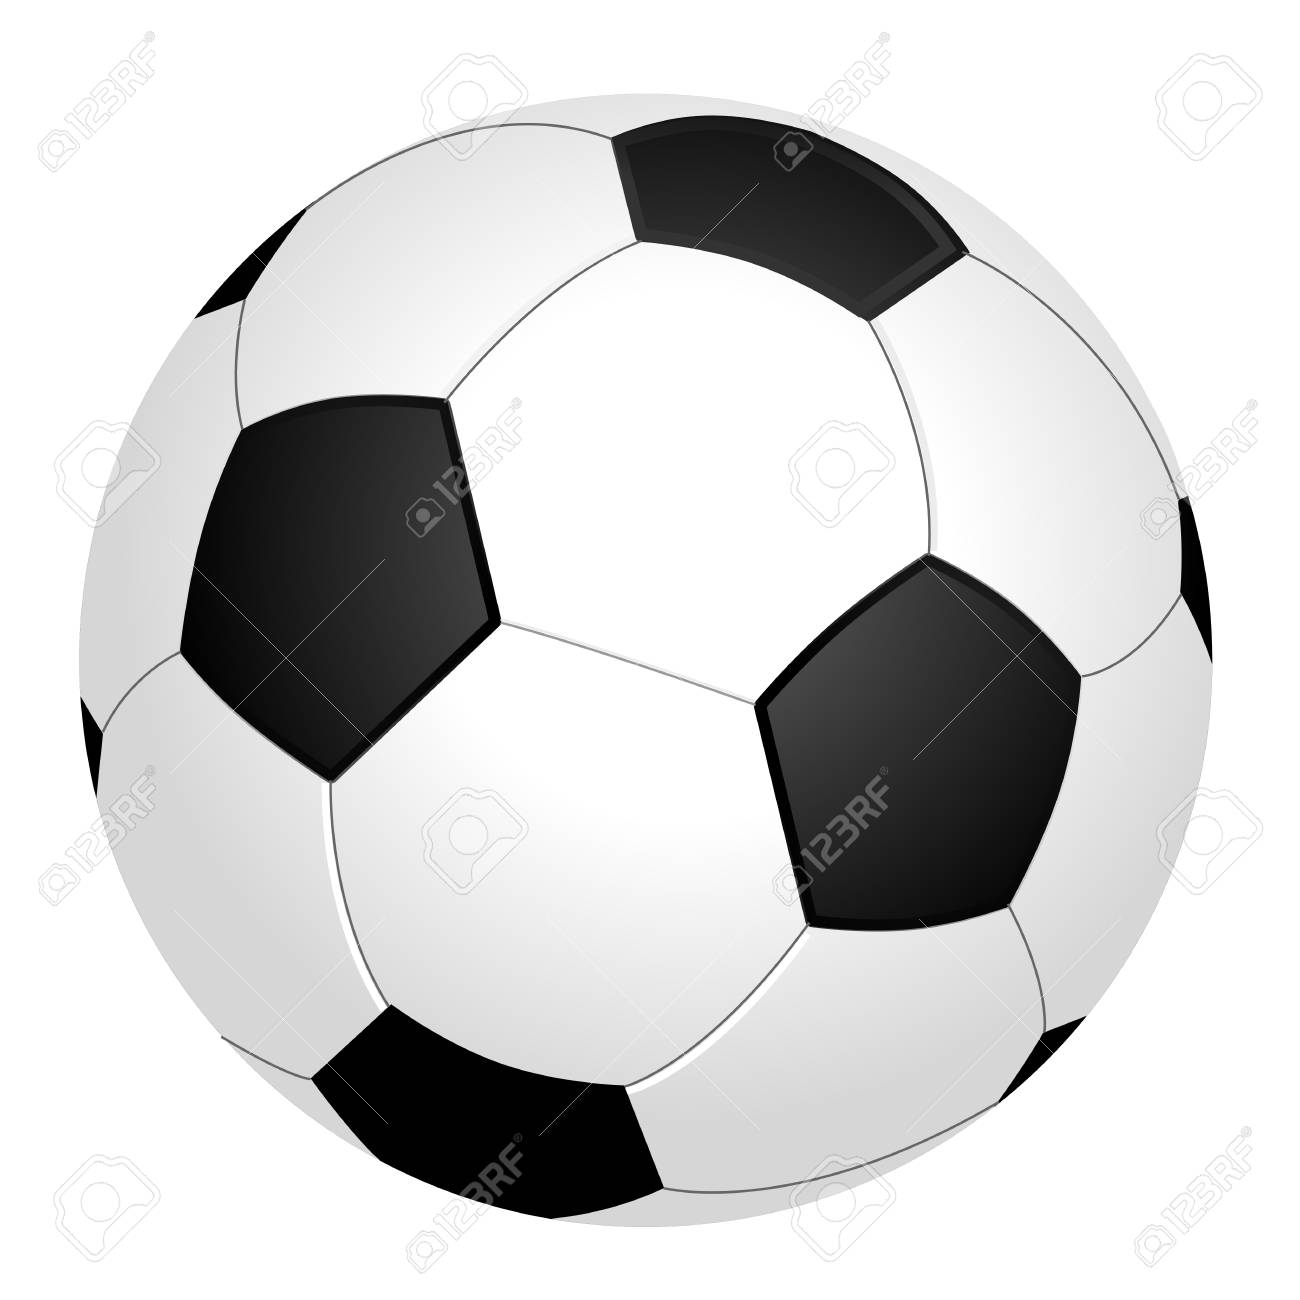 Black And White Soccer Ball Or Football Graphic Background